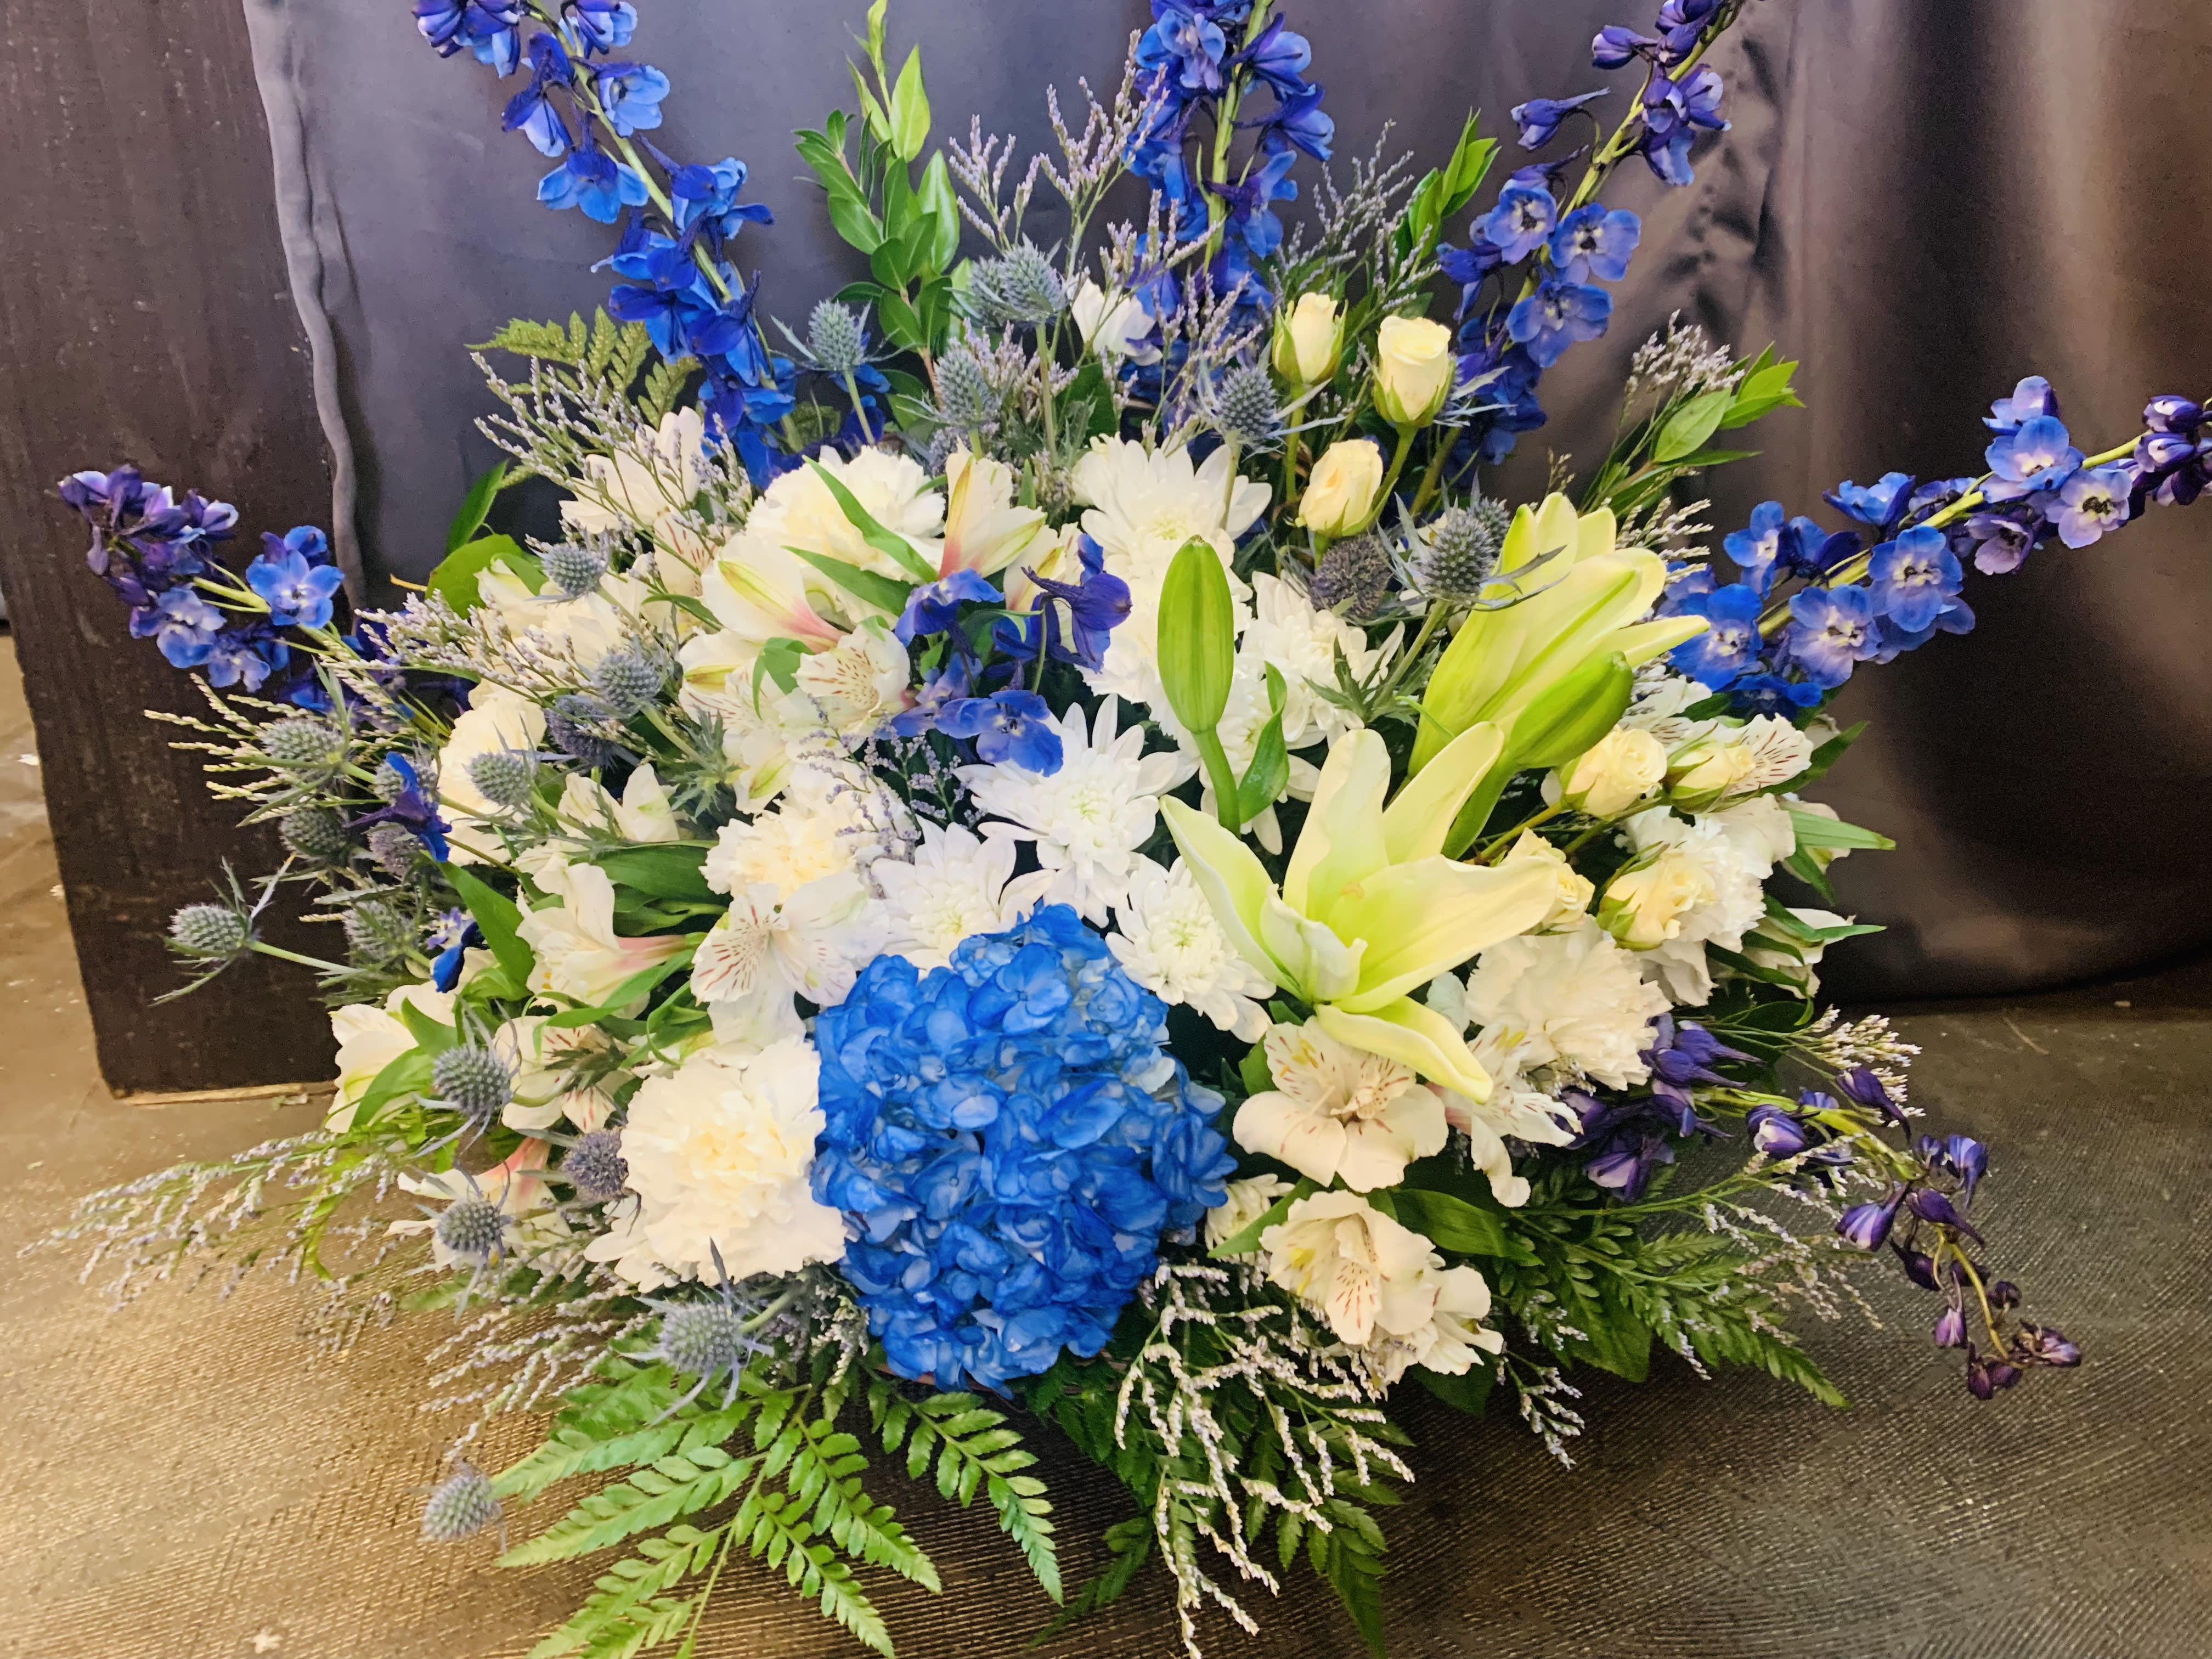 Blue for you - Brighten the home with the peace and beauty of a bright blue sky. This beautiful bouquet pairs pure white flowers with deep blue blooms in a gorgeous blue basket  Blooms such as blue hydrangea, crème roses, graceful white oriental lilies, white alstroemeria, a white disbud mum, purple statice and lavender limonium are accented by seeded eucalyptus and salal in a stunning cobalt blue glass vase. Orientation: One-Sided  SUBSTITUTION POLICY Always deliver the freshest flowers! Please note the bouquet pictured reflects our original design.  If the exact flowers or container in this arrangement are not available, our local florists will create a beautiful bouquet with the freshest available flowers.